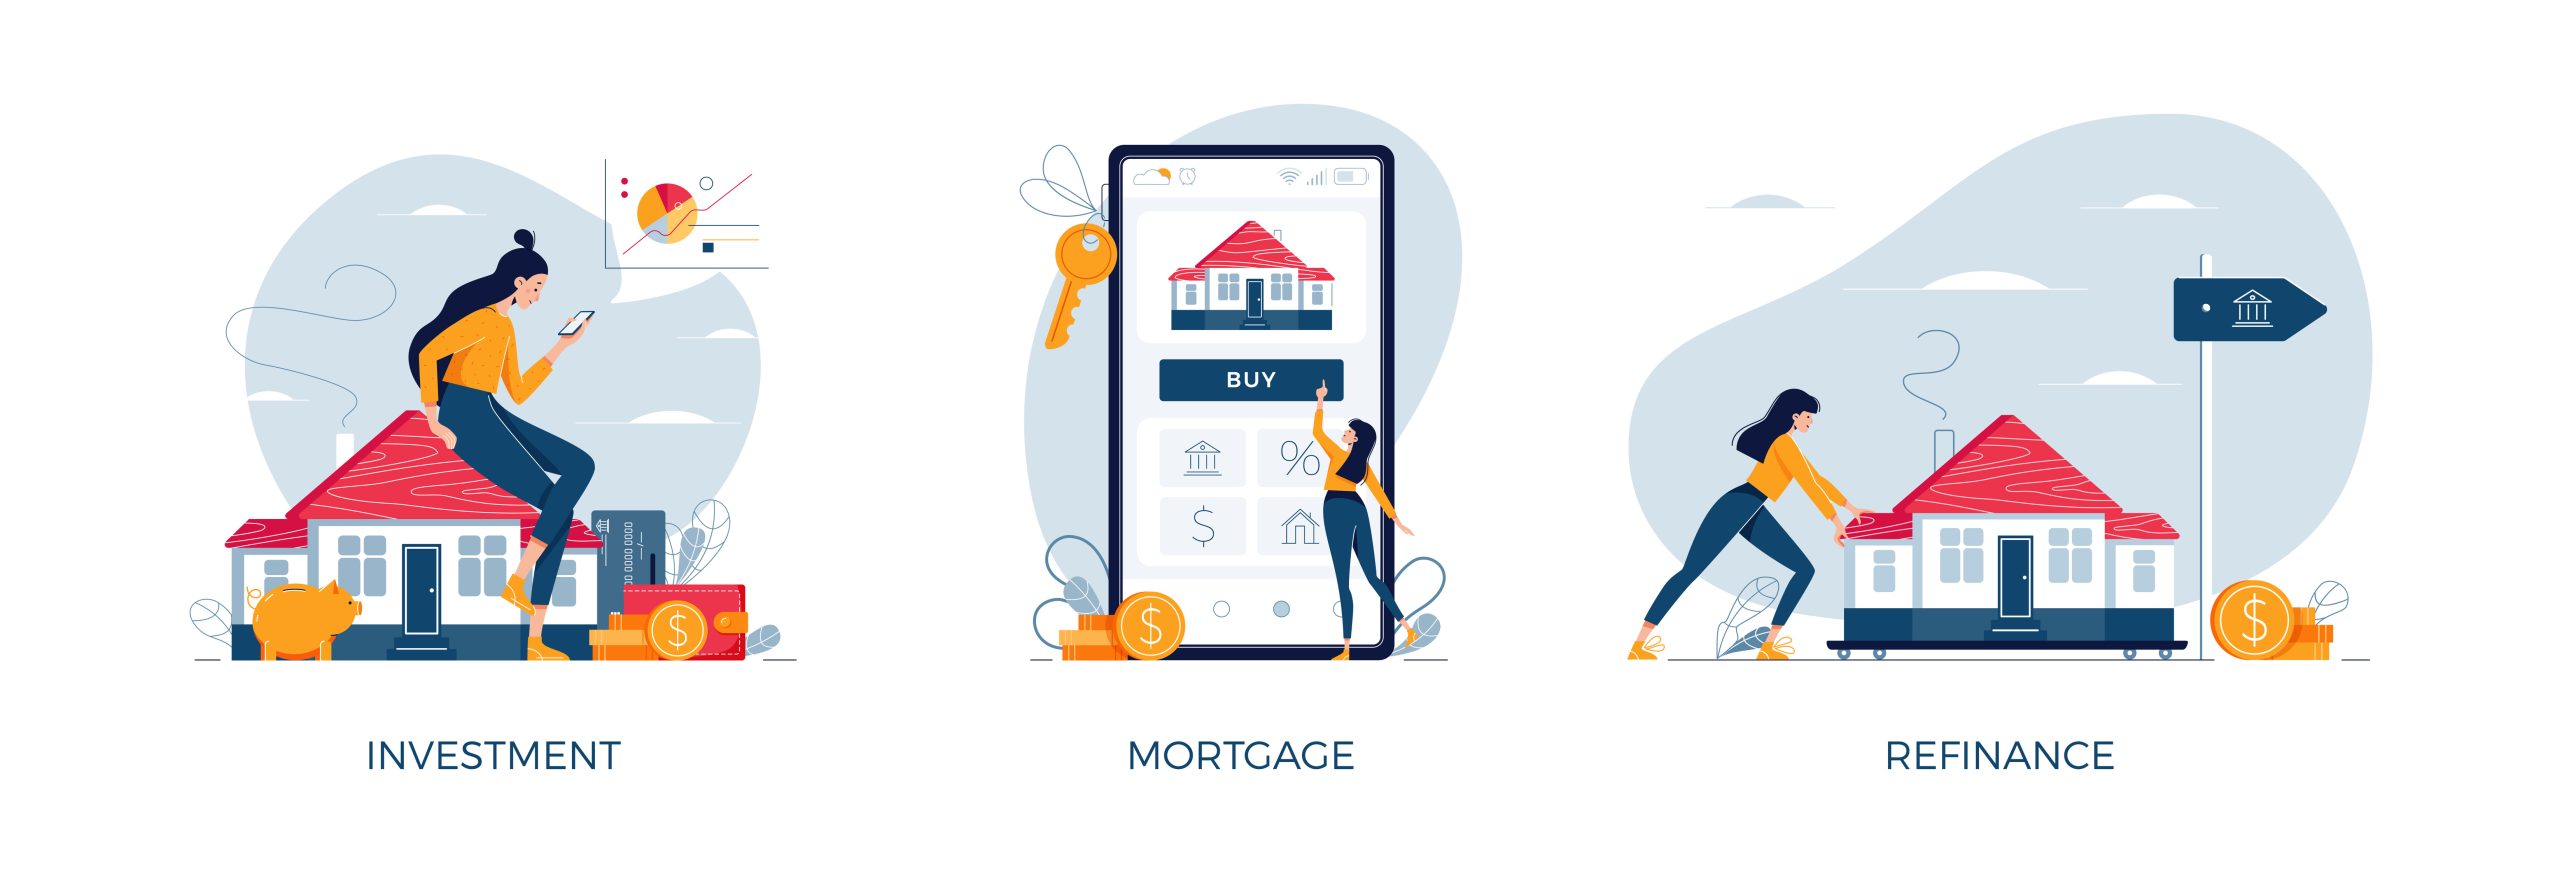 Property banners set. House-buying, mortgage refinancing, real estate investment. Invest in house, property purchase, loan refinance concepts collection for web design.Modern flat vector illustration